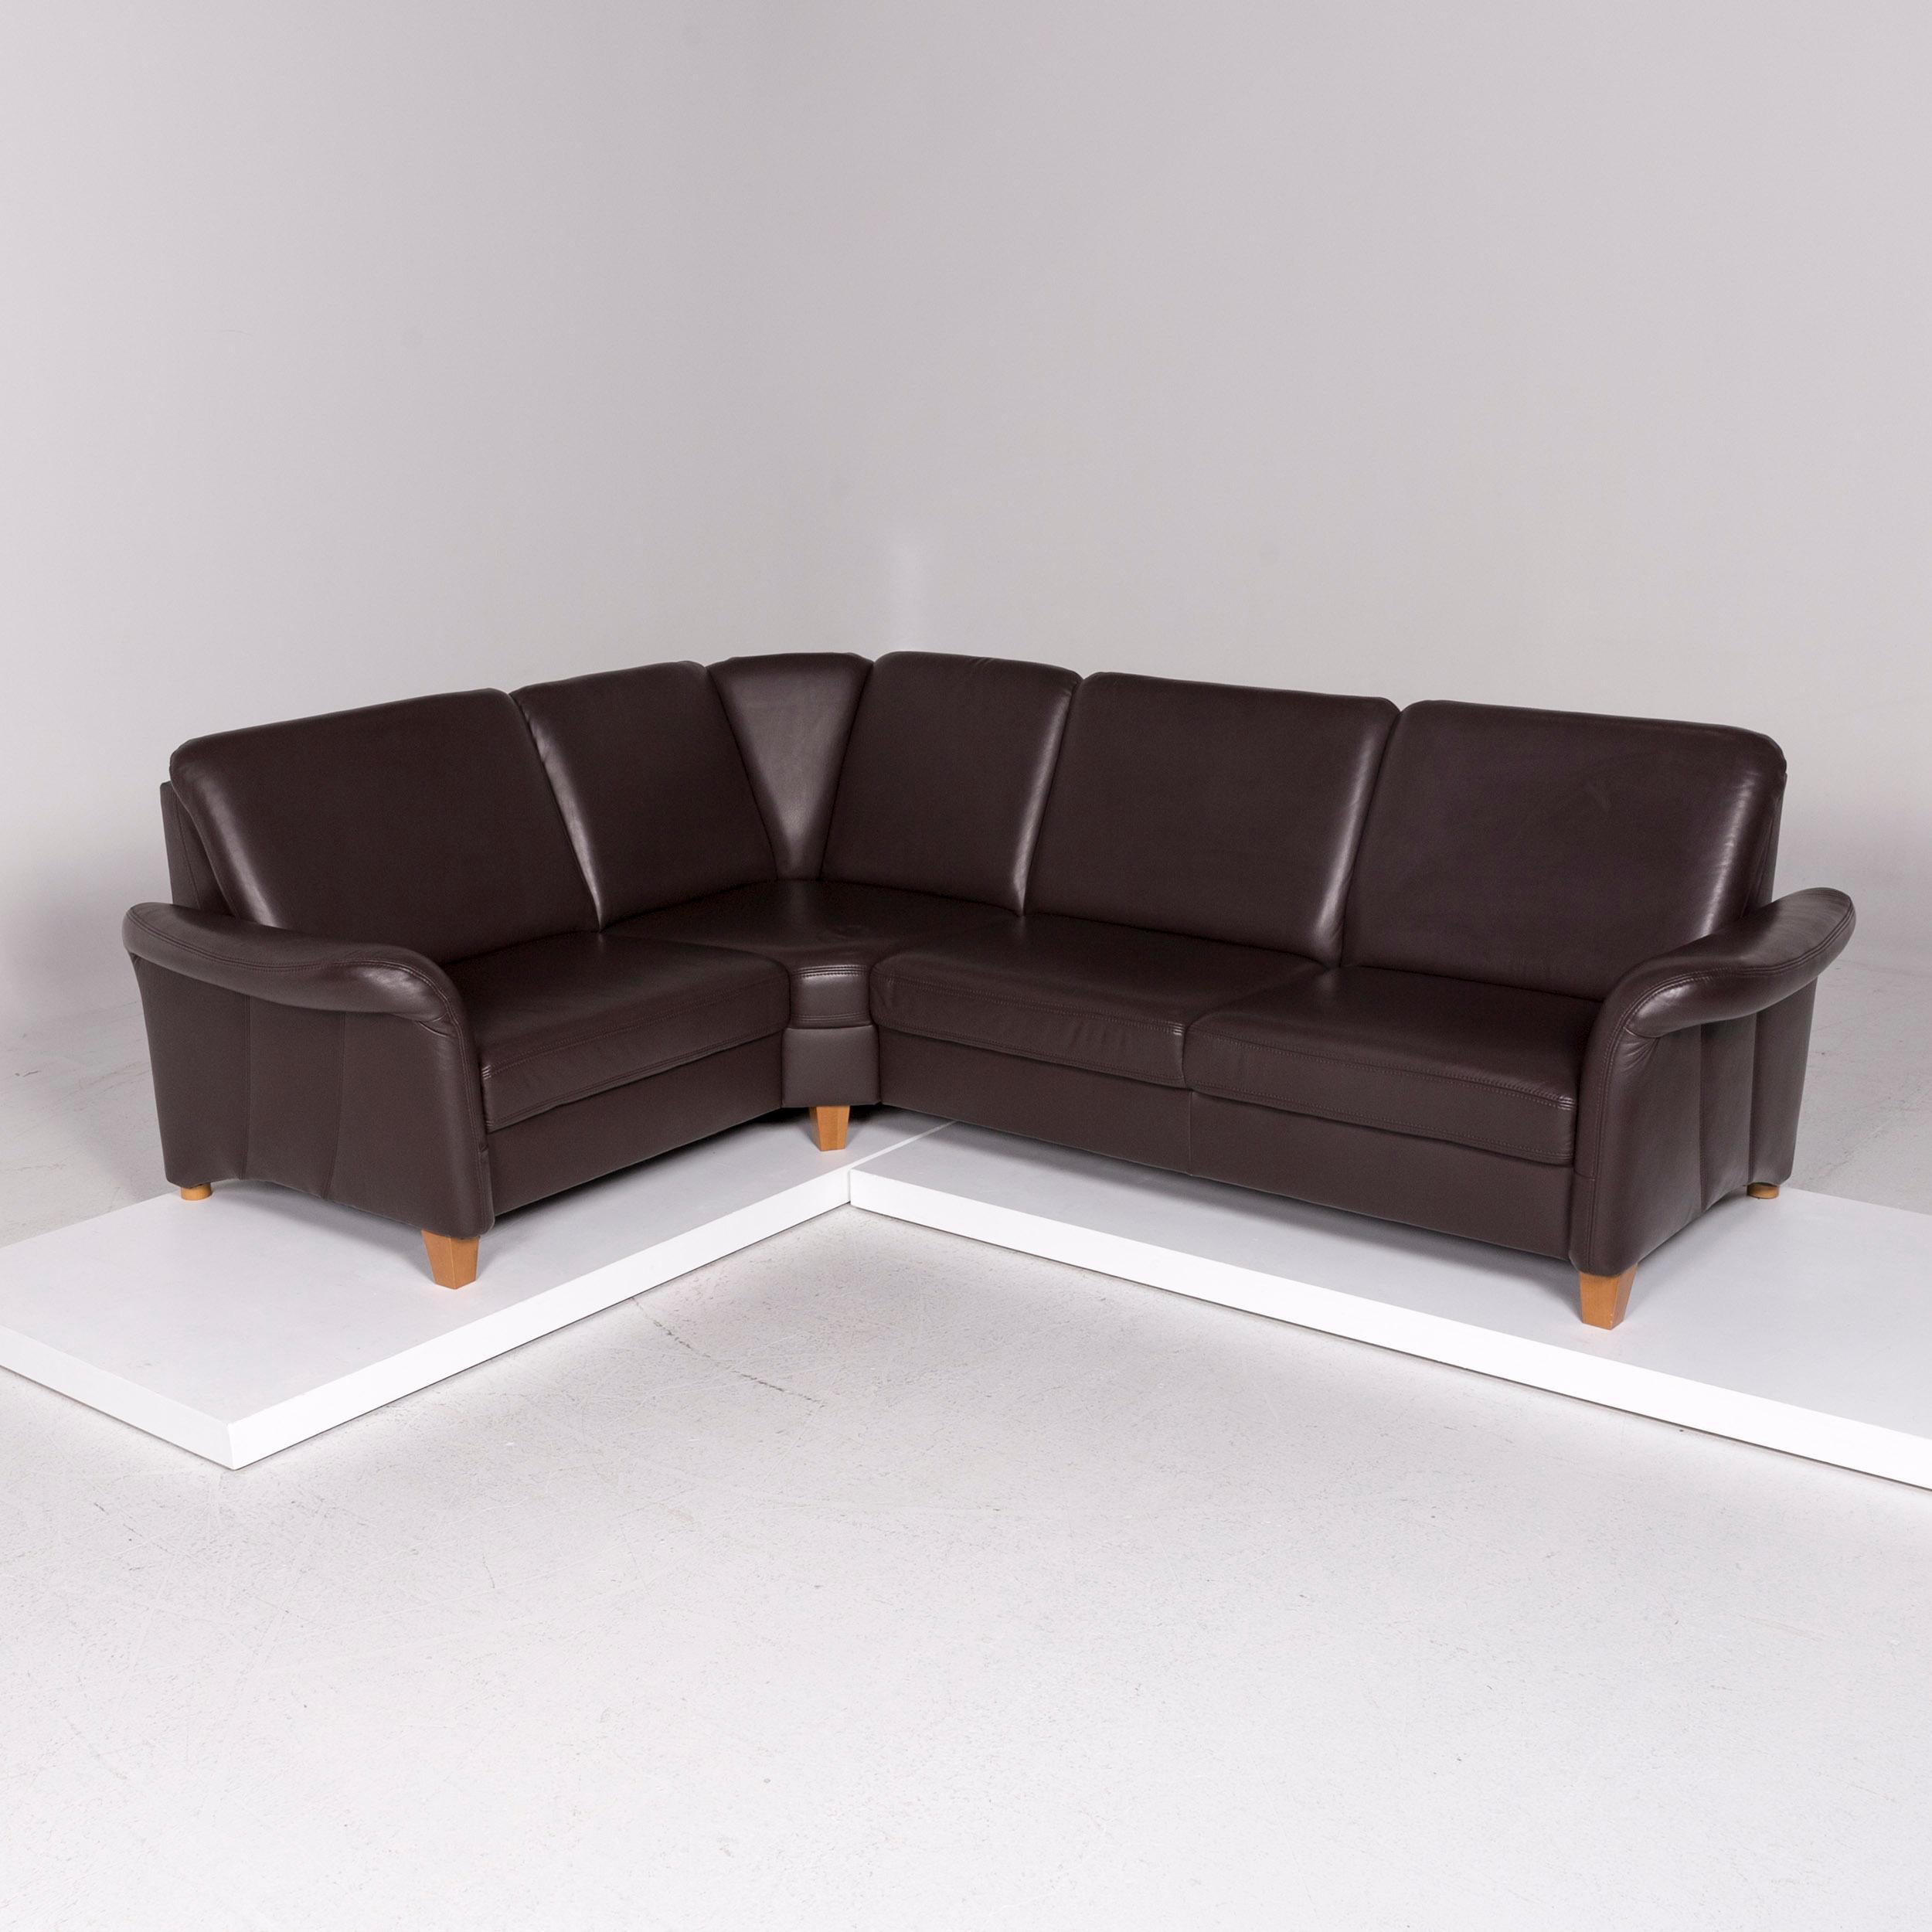 We bring to you a Himolla leather corner sofa brown dark brown sofa cocuch.

 

 Product measurements in centimeters:
 

Depth 90
Width 208
Height 95
Seat-height 49
Rest-height 69
Seat-depth 56
Seat-width 148
Back-height 48.